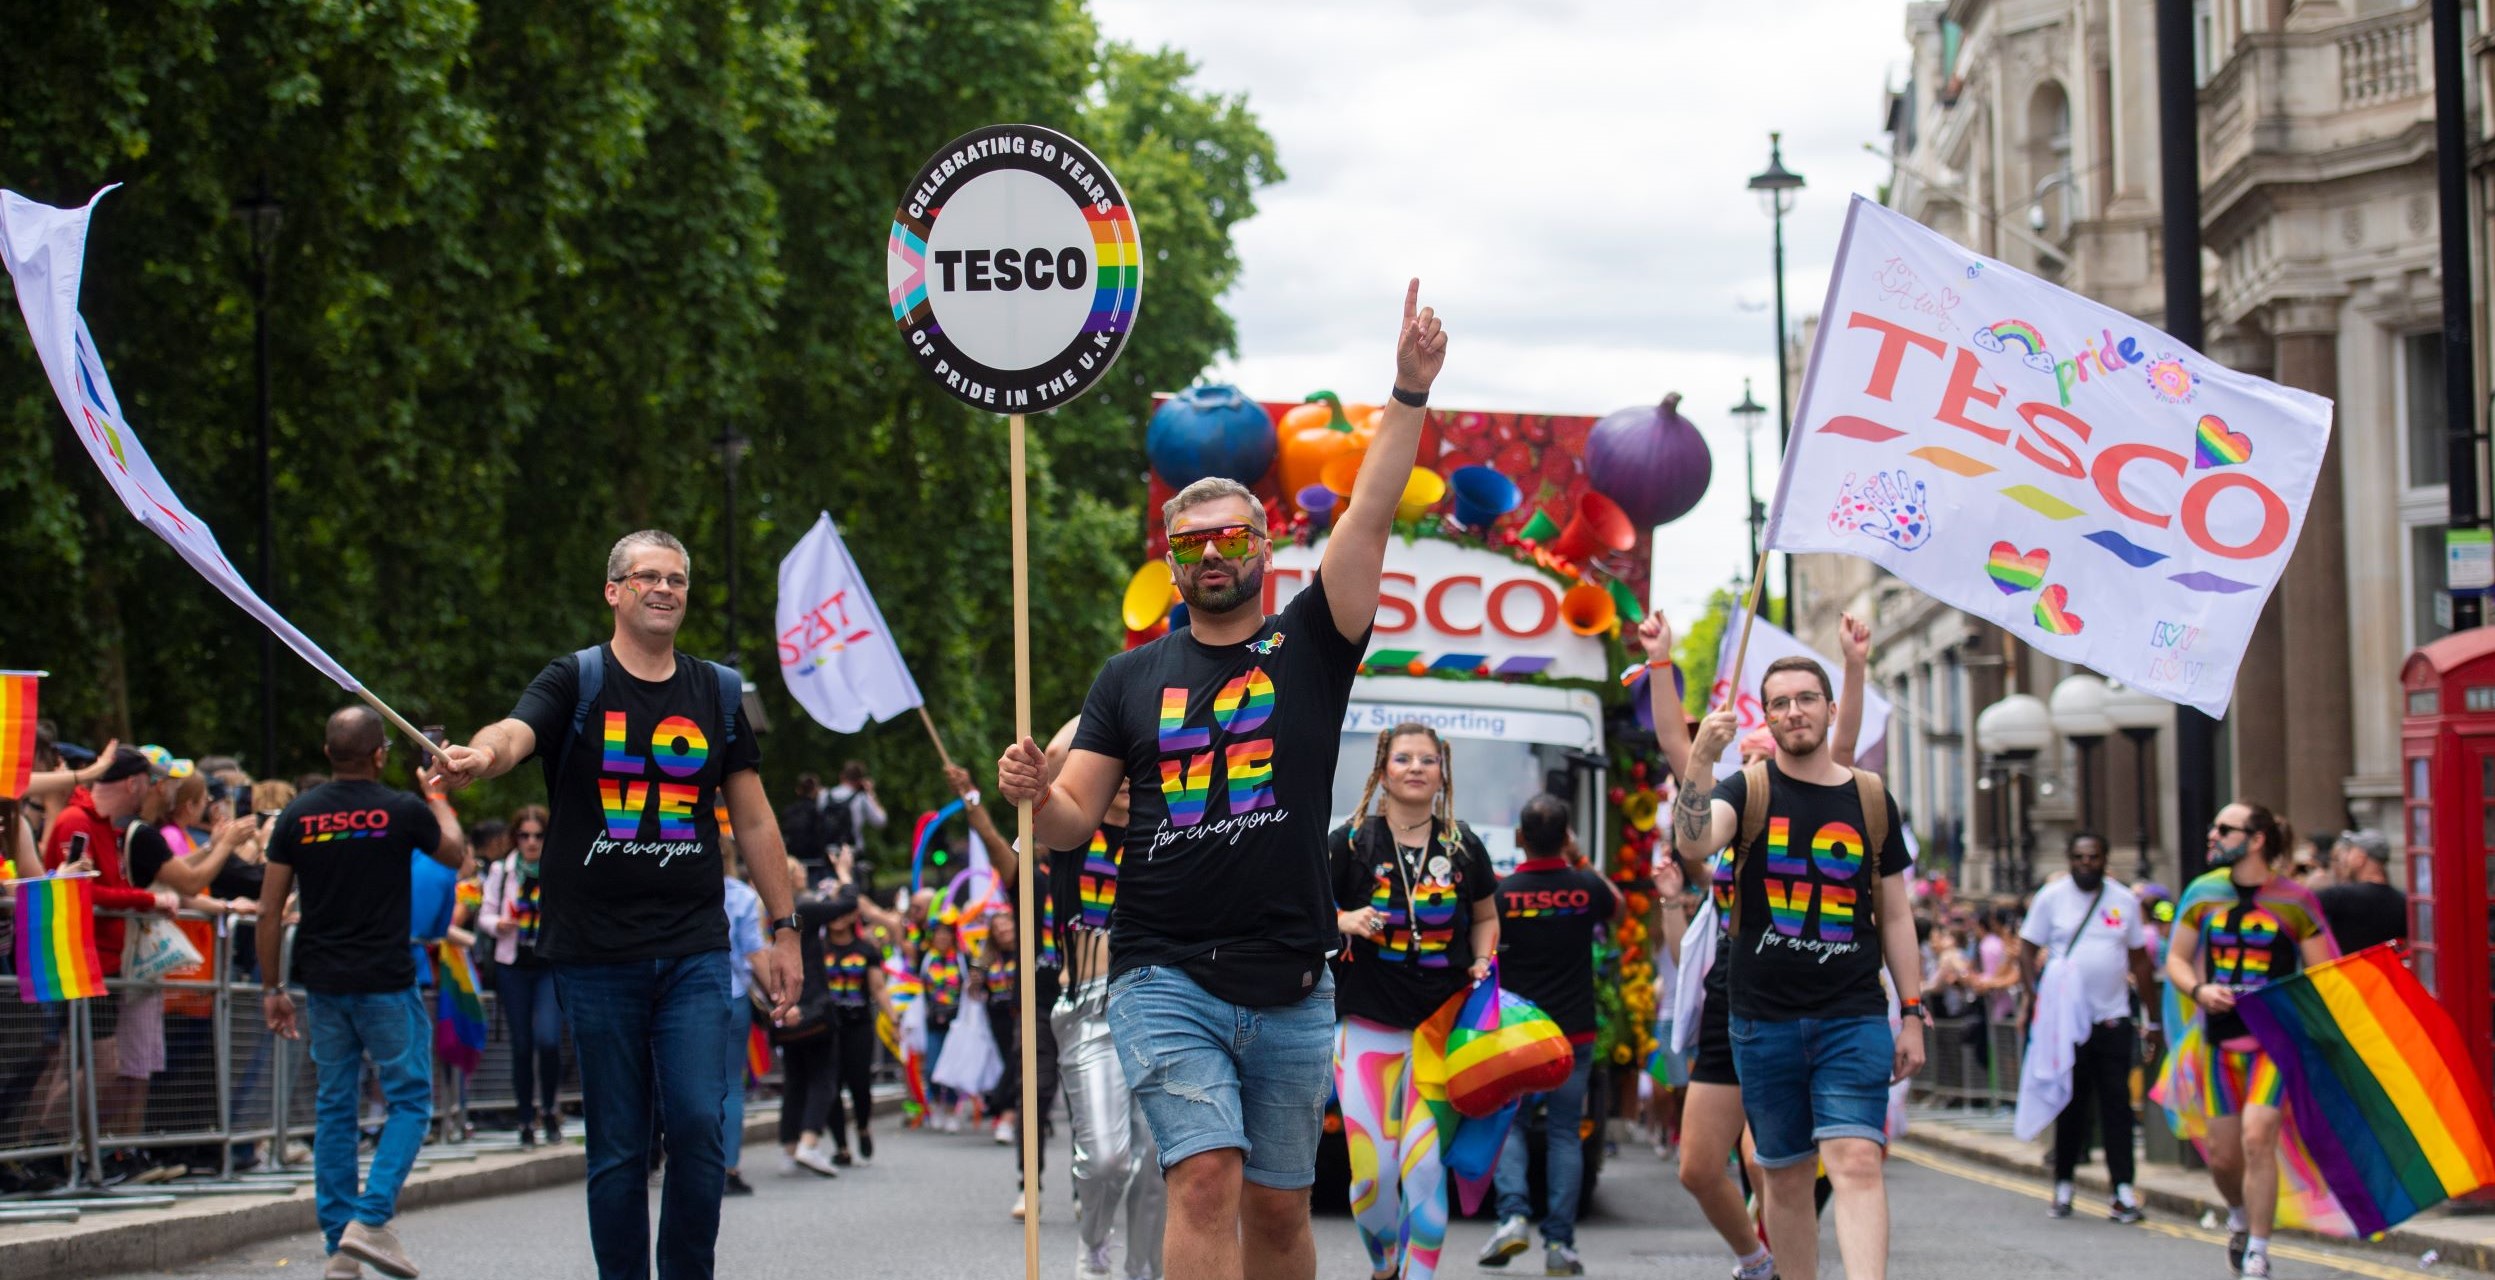 Colleagues walking in front of the Tesco Pride float enjoying themselves